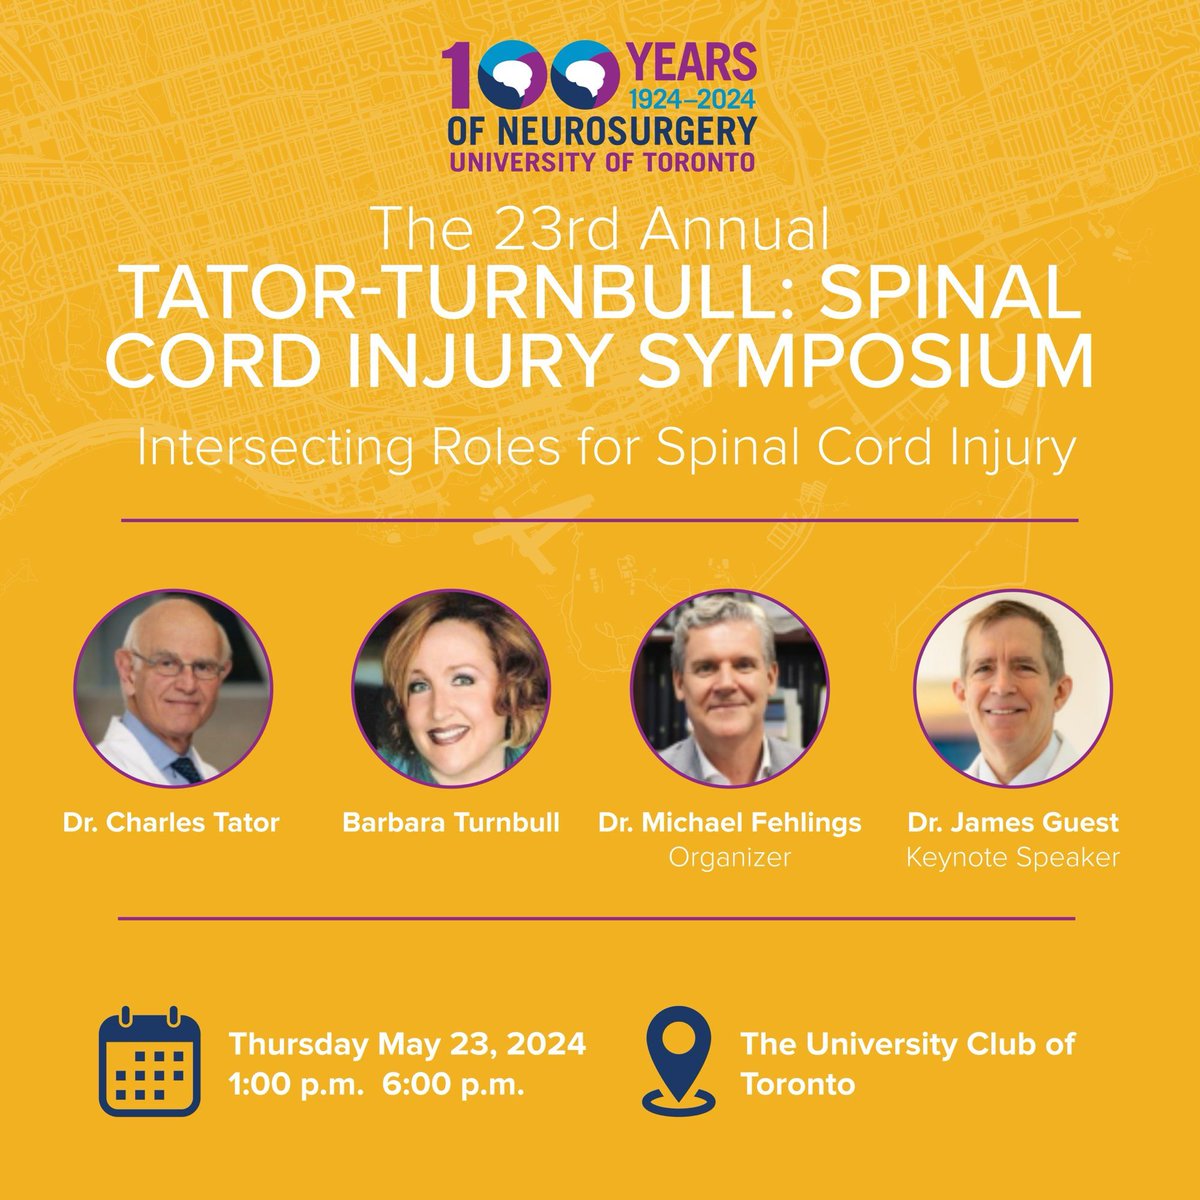 Register now for the 23rd Annual Tator-Turnbull #SpinalCordInjury #Symposium with @CharlesTator @barbturnbull @DrFehlings and James Guest! This year’s topic is ‘Intersecting Roles for Spinal Cord Injury Biologics and #Neuromodulation Therapeutics.’ bit.ly/4aljabN